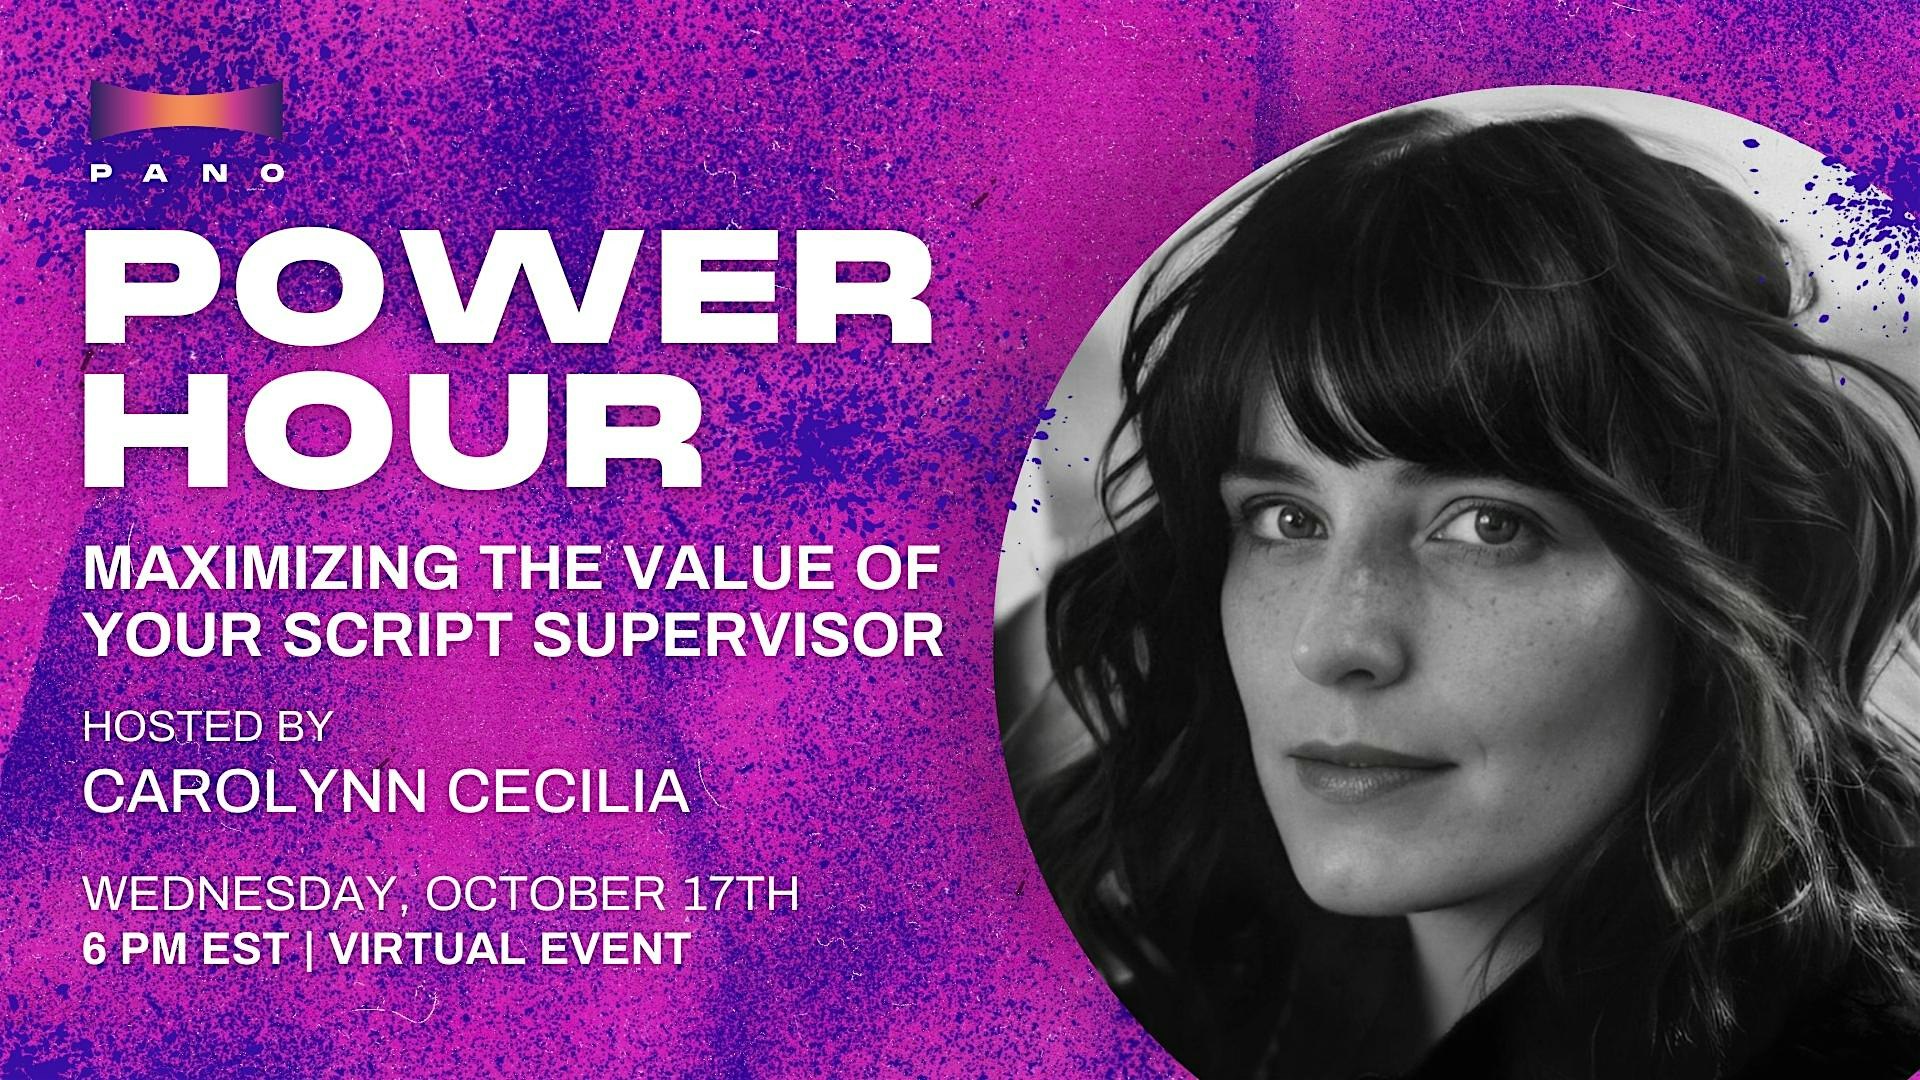 PANO Power Hour: Maximizing the Value of Your Script Supervisor